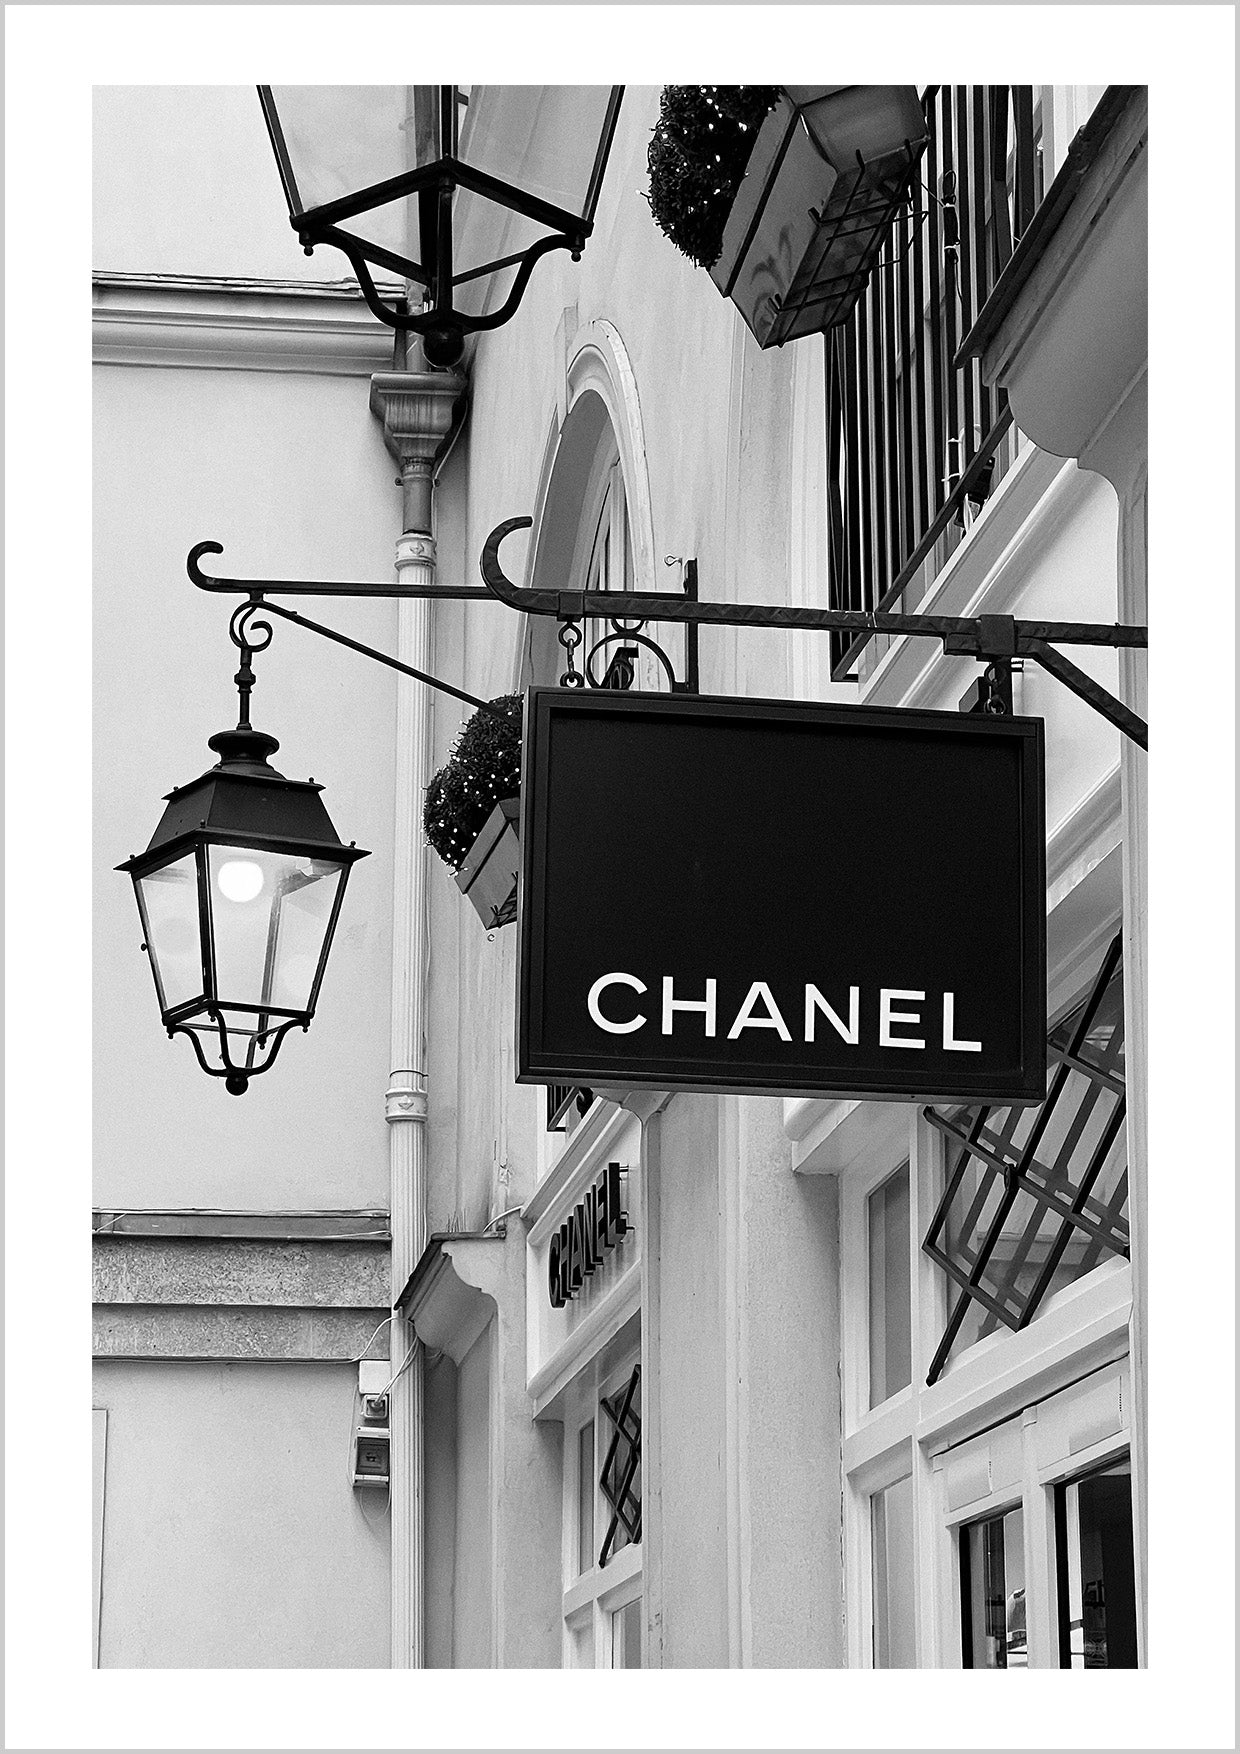 Photography print of an iconic fashion Chanel store.